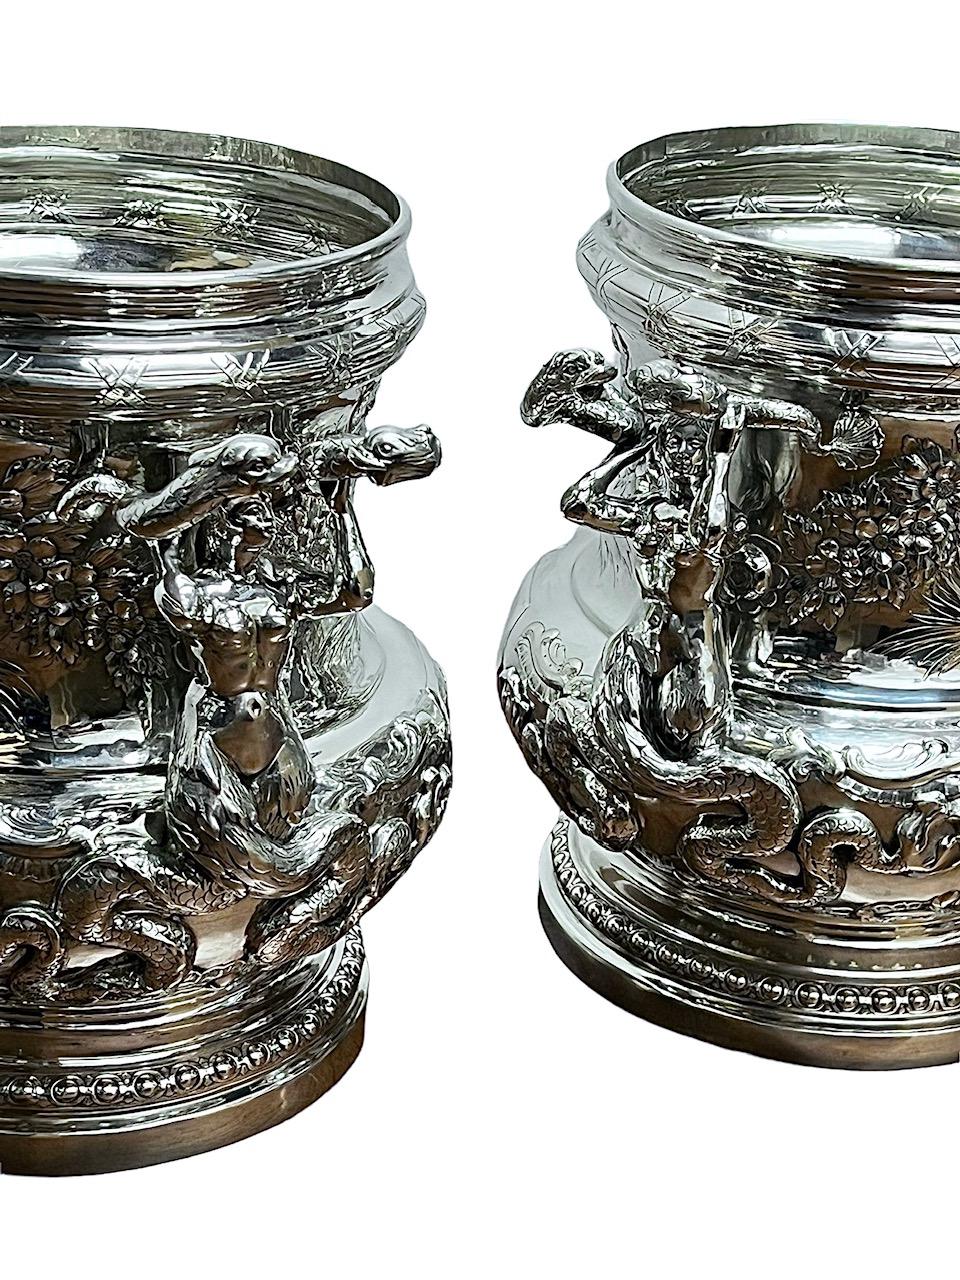 1890 Pair of German Solid Sterling Silver Coolers (Buckets), Sea Creatures For Sale 11